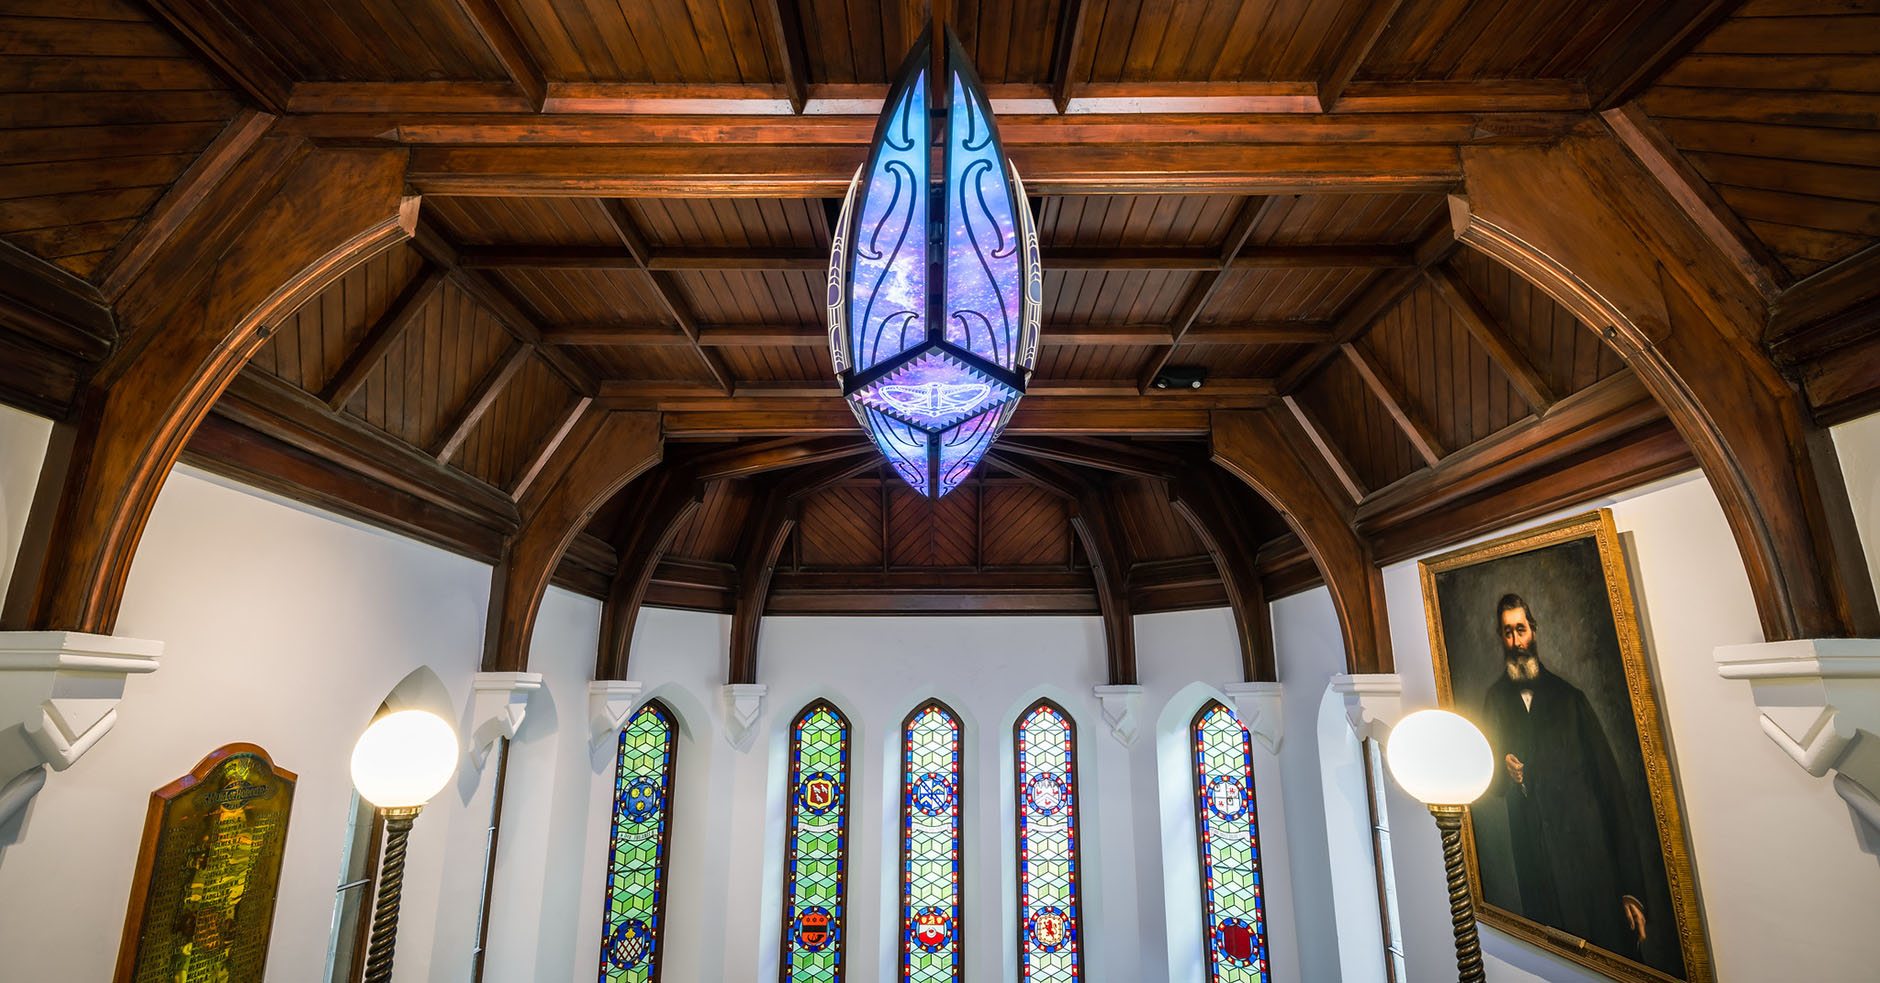 Ornate wooden ceiling with celestial waka artwork, and stained glass windows, in the University's registry (Clocktower) building.